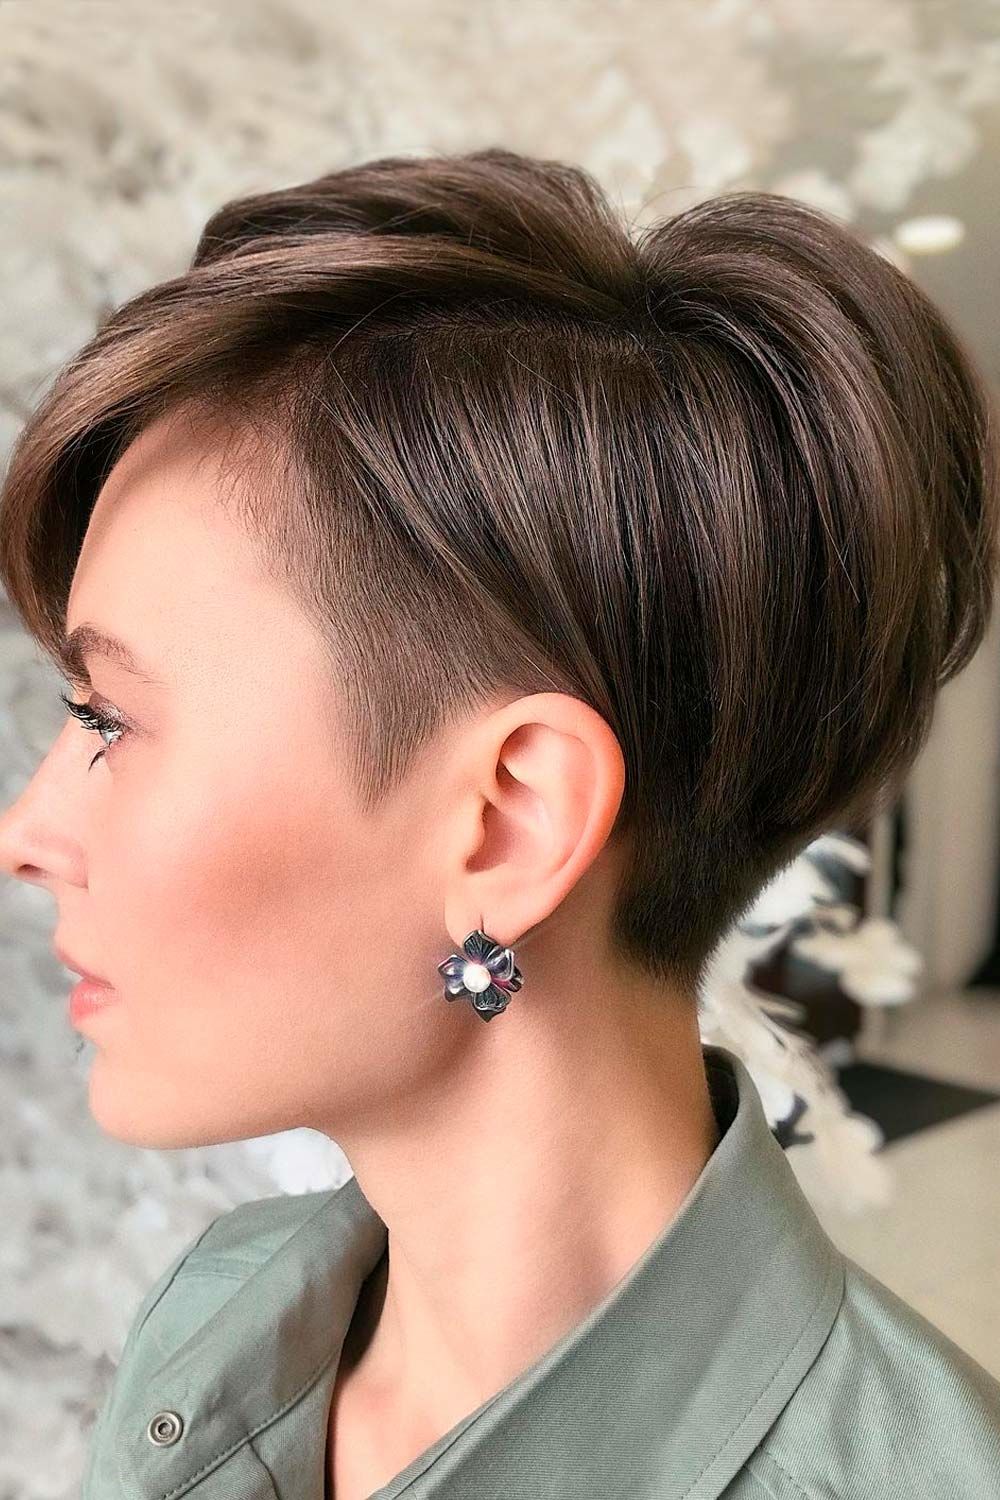 Short hairstyles for Round Face 76 Short hair for round face Asian | Short hairstyles for fat faces and double chins | Short hairstyles for round faces and thin hair Short Hairstyles for Round Face Women